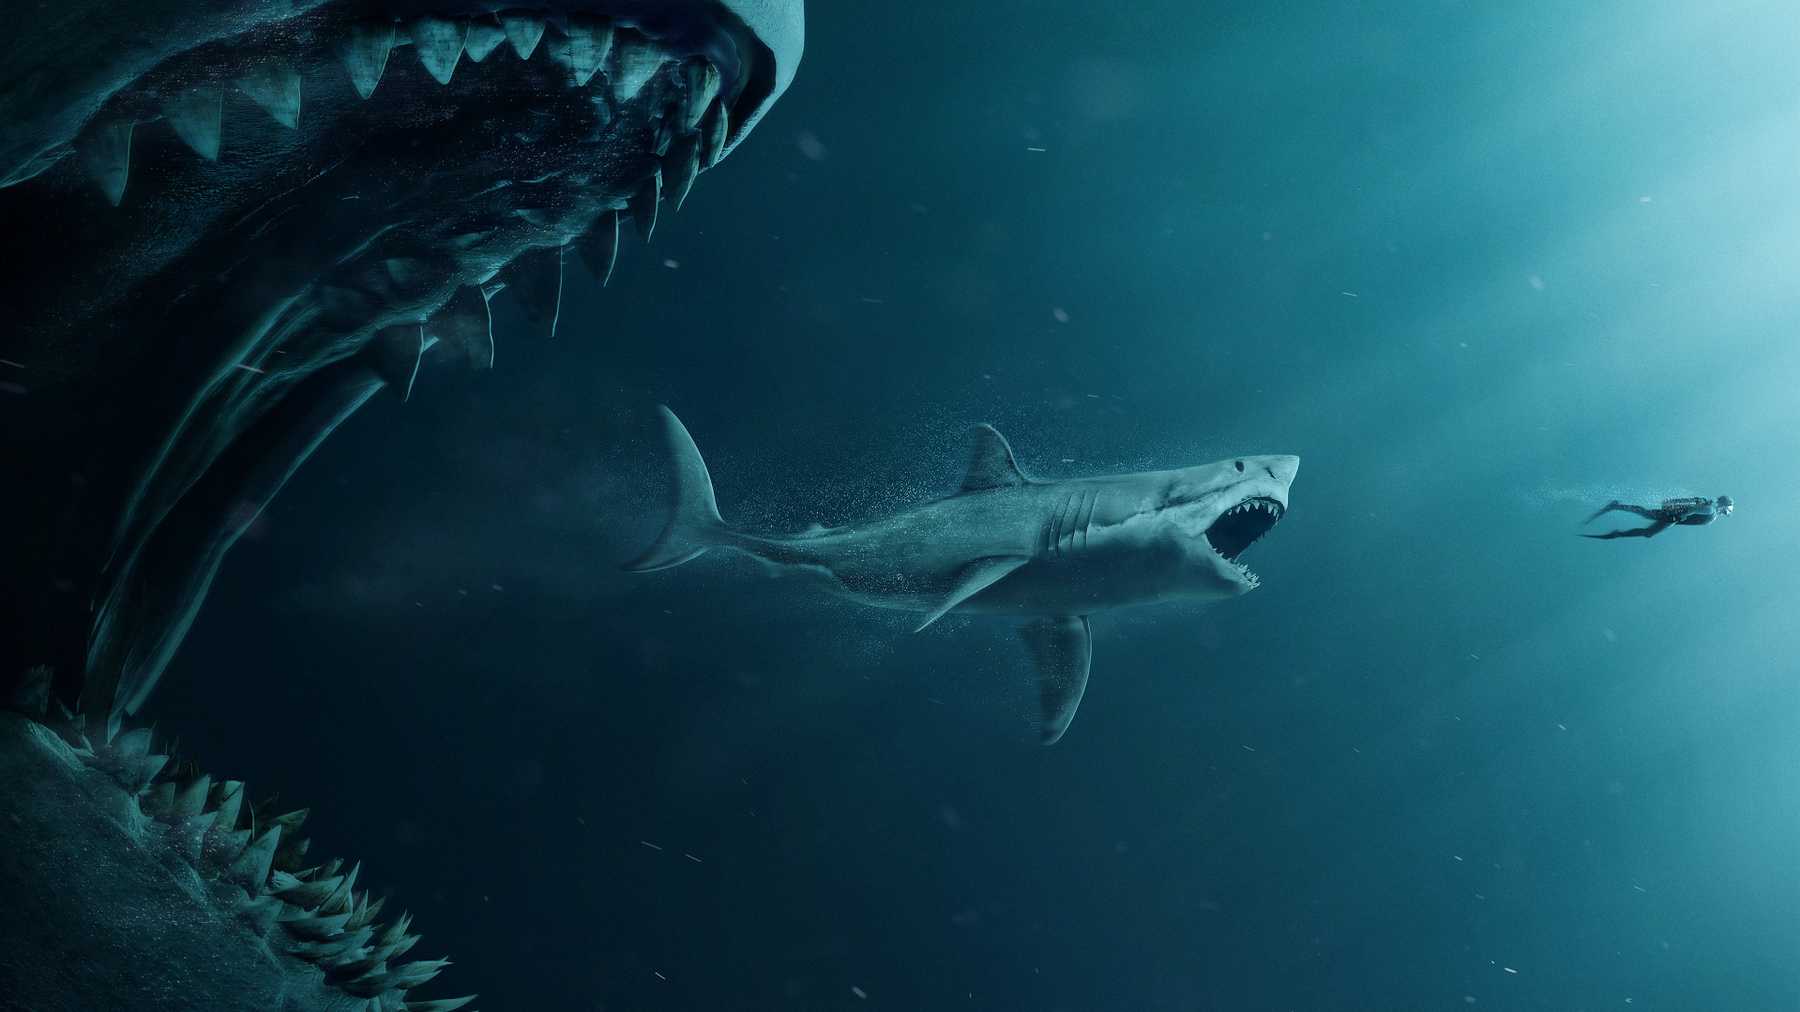 The megalodon about to eat the great white shark that is about to eat the human, showing the size difference between the animals. This is a movie poster for The Meg.